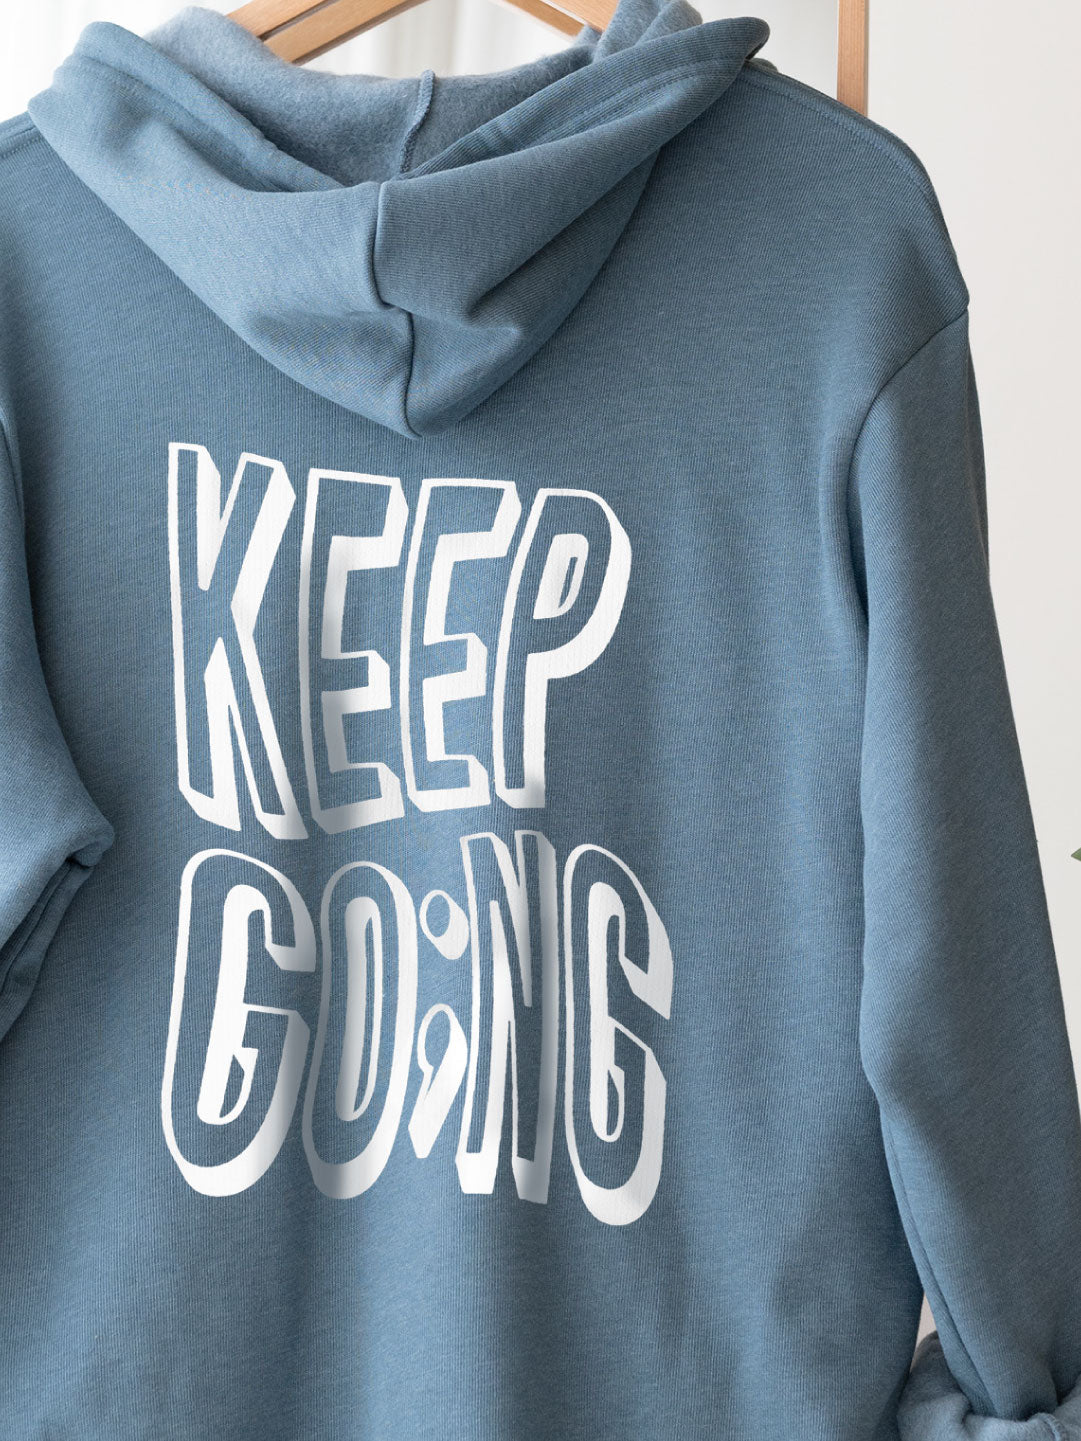 Keep Going Semicolon Hoodie | Suicide Prevention & Awareness